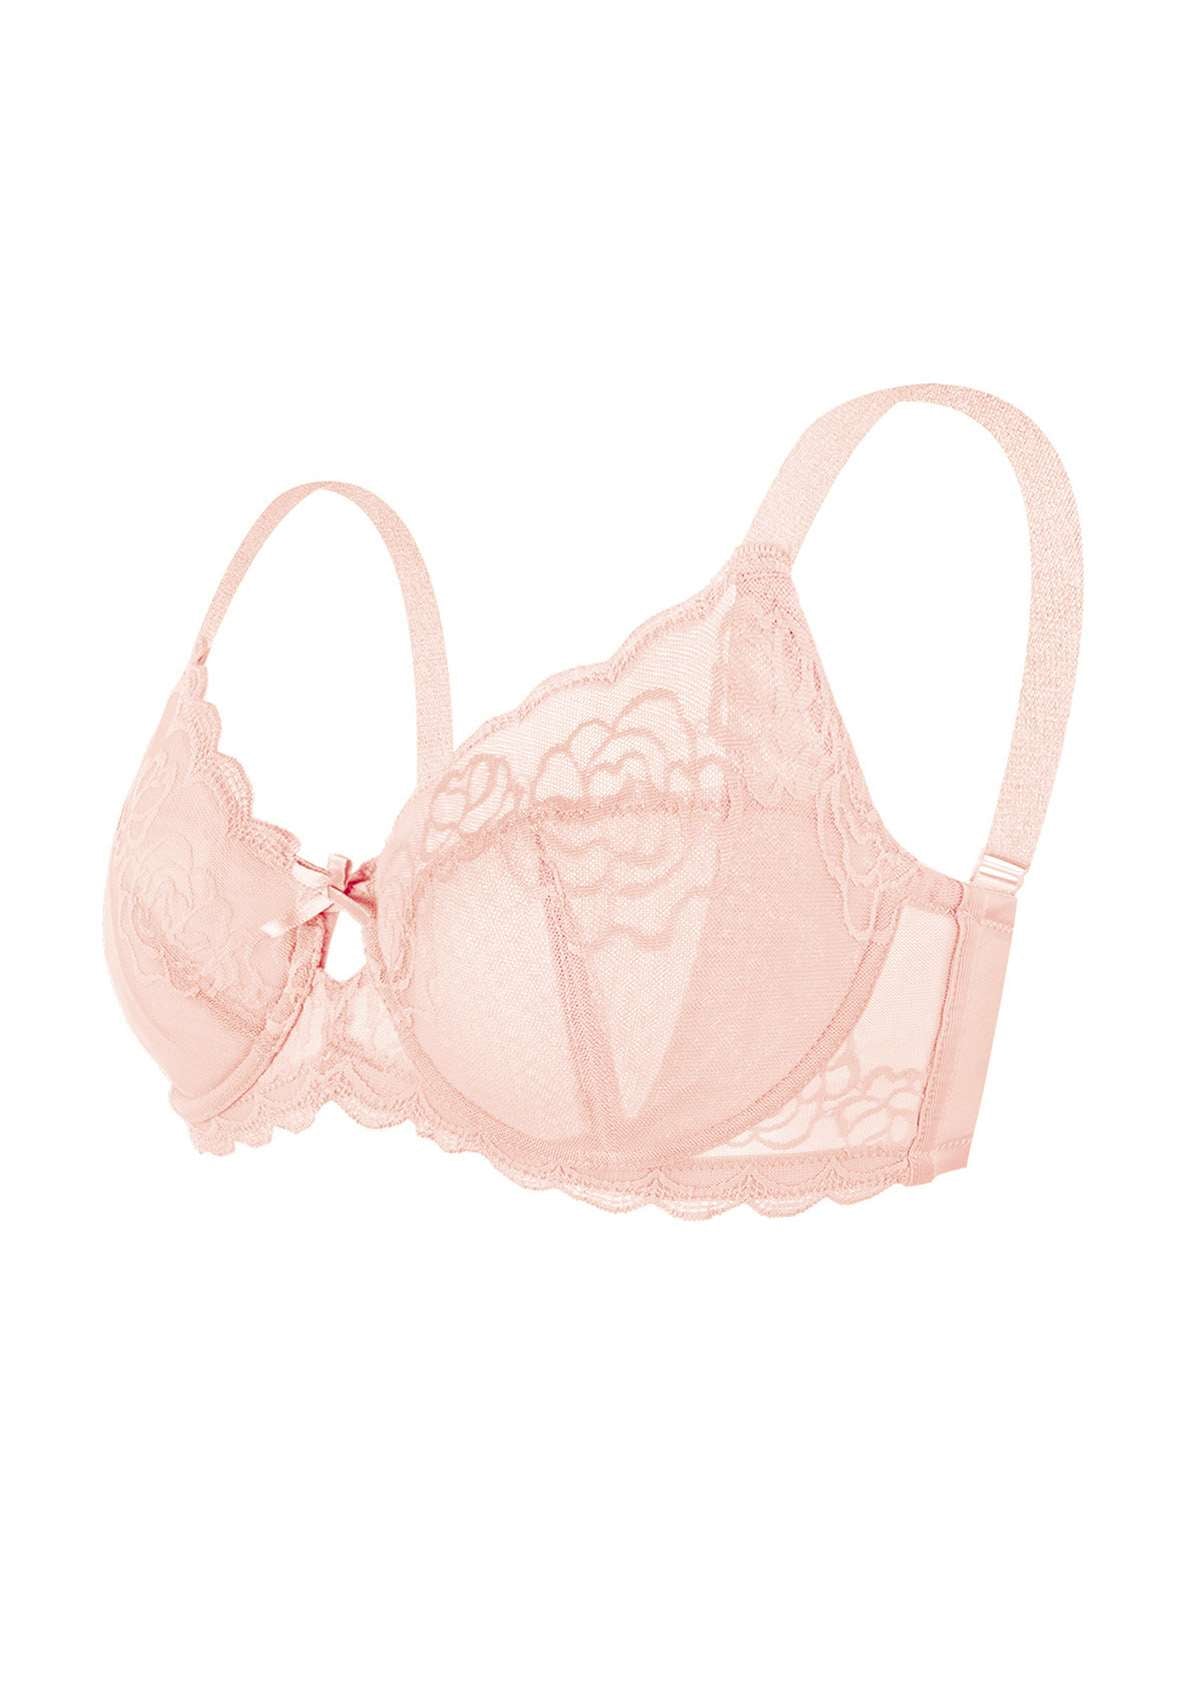 HSIA Rosa Bonica Sheer Lace Mesh Unlined Thin Comfy Woman Bra - Pink / 34 / D